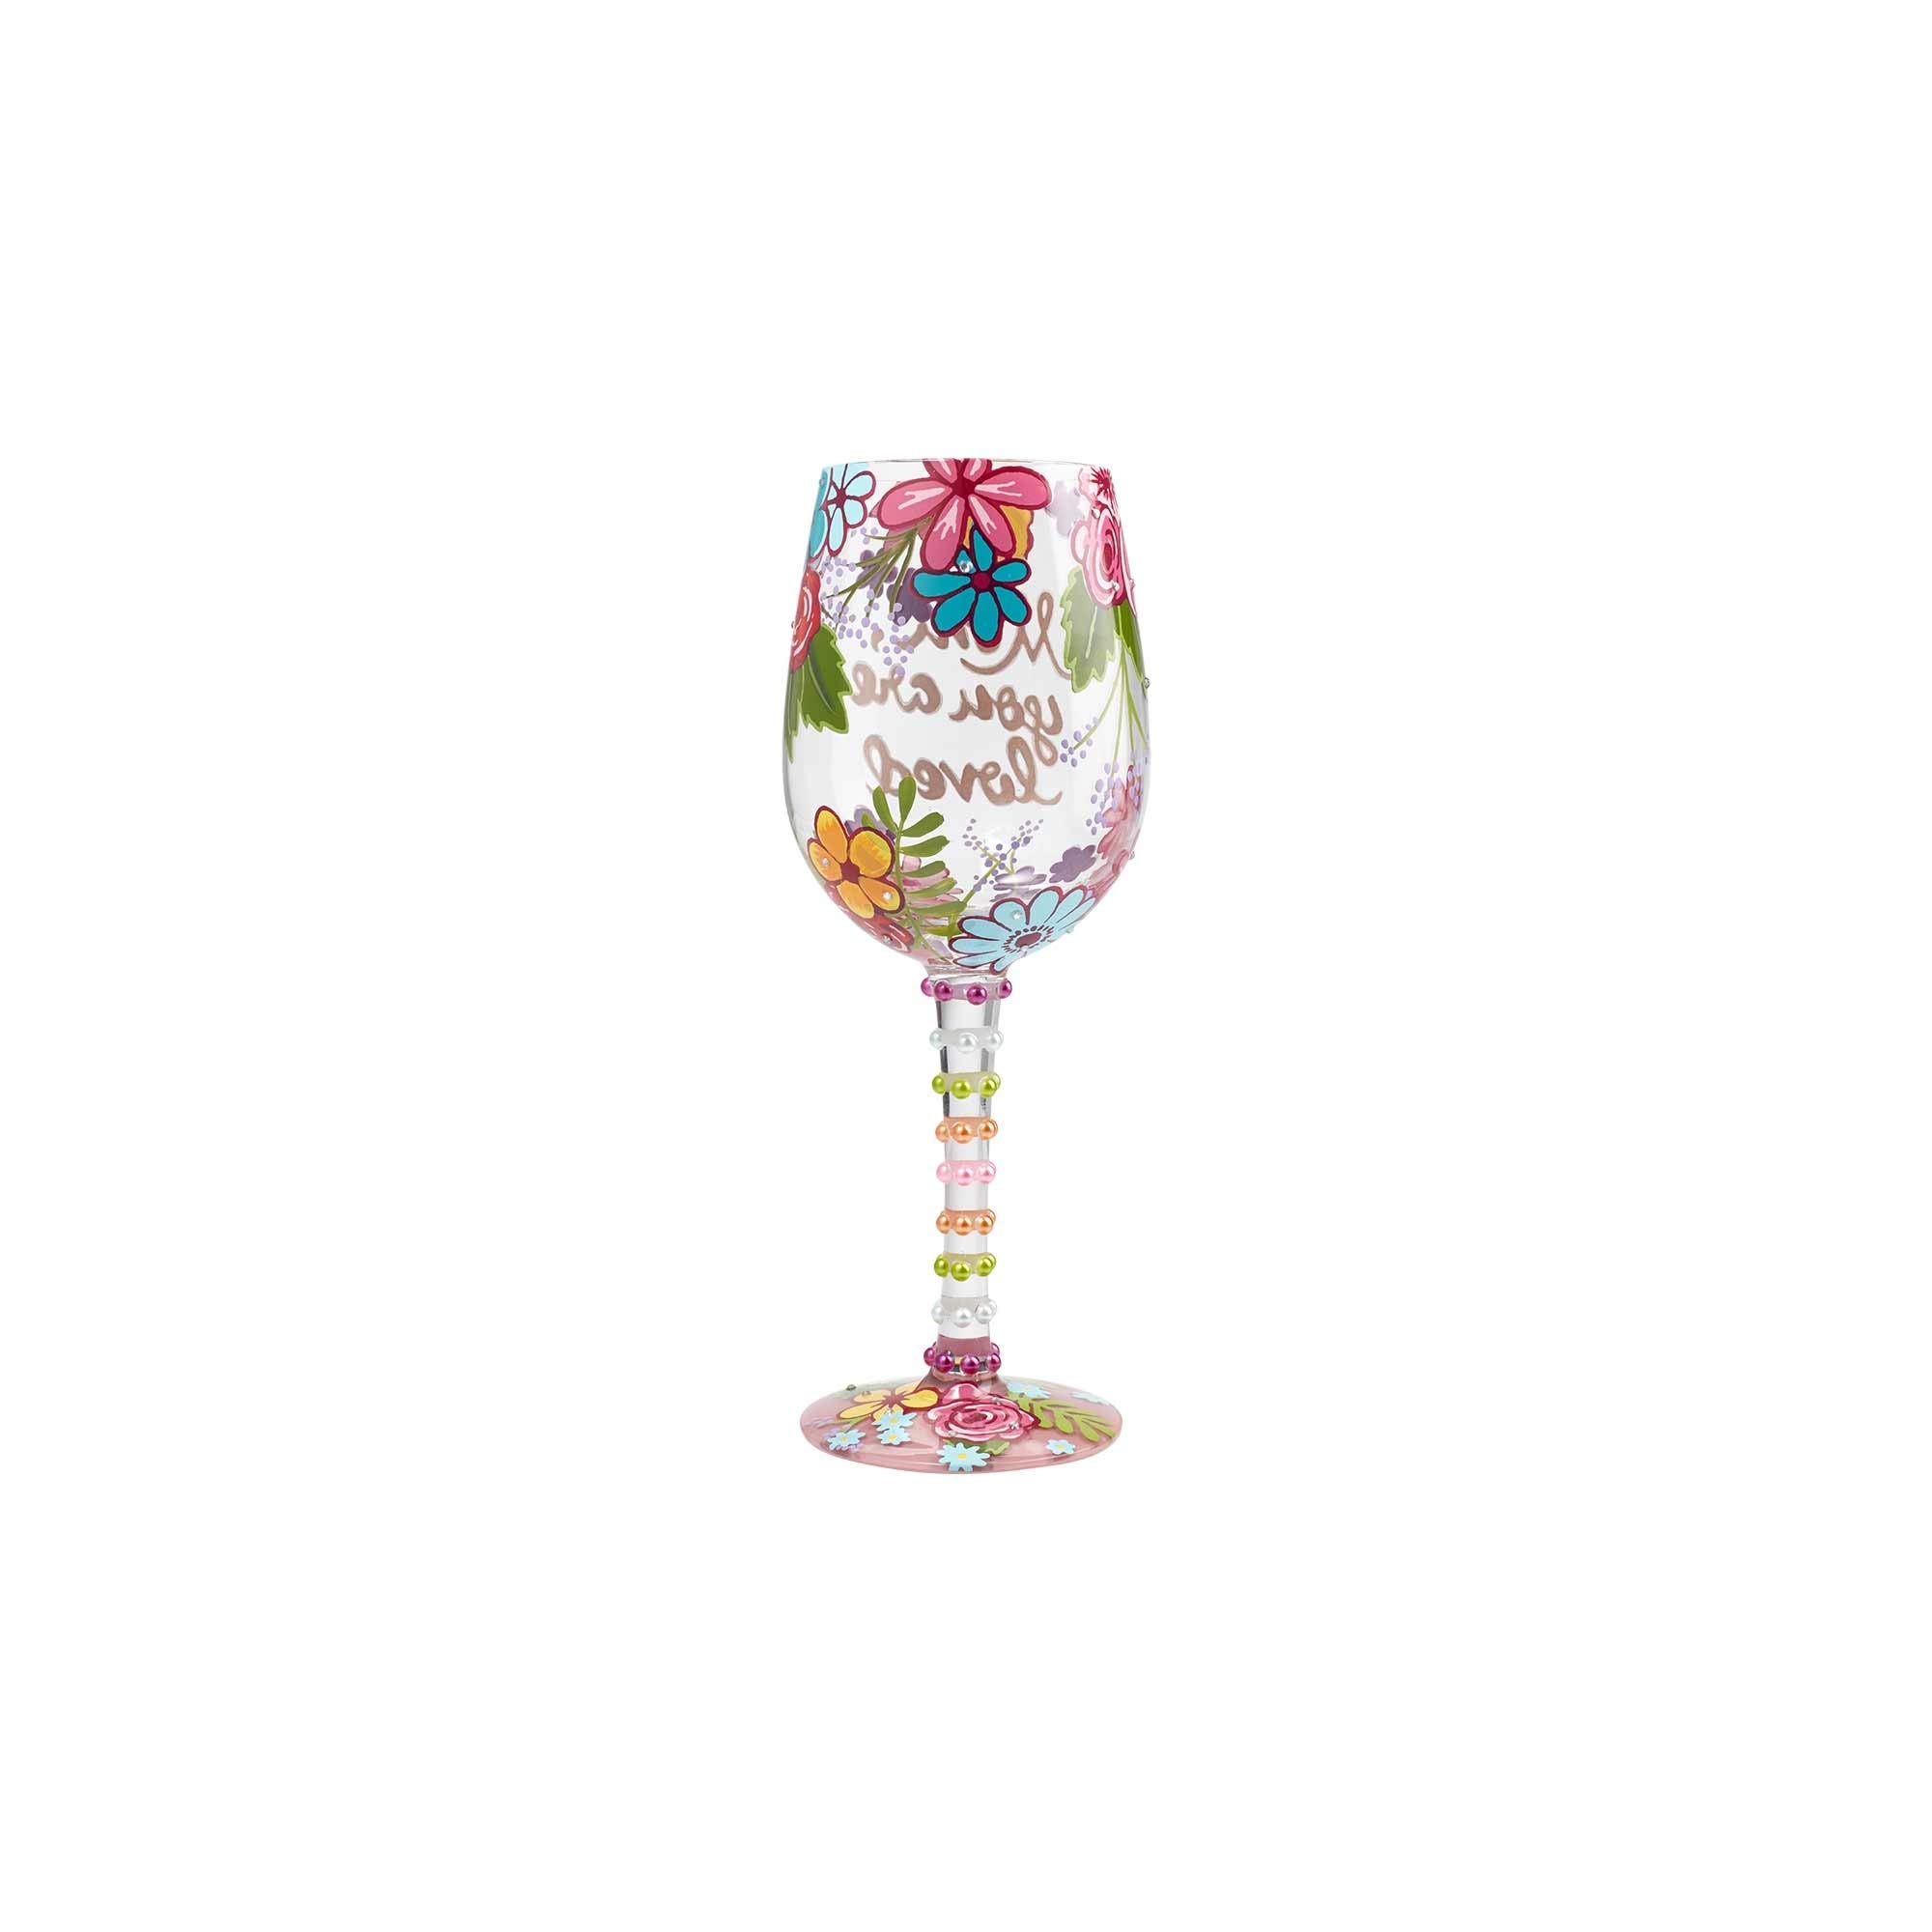 Enesco Lolita Mom You are Loved Hand Painted Wine Glass, 1 Count (Pack of 1), Multicolor